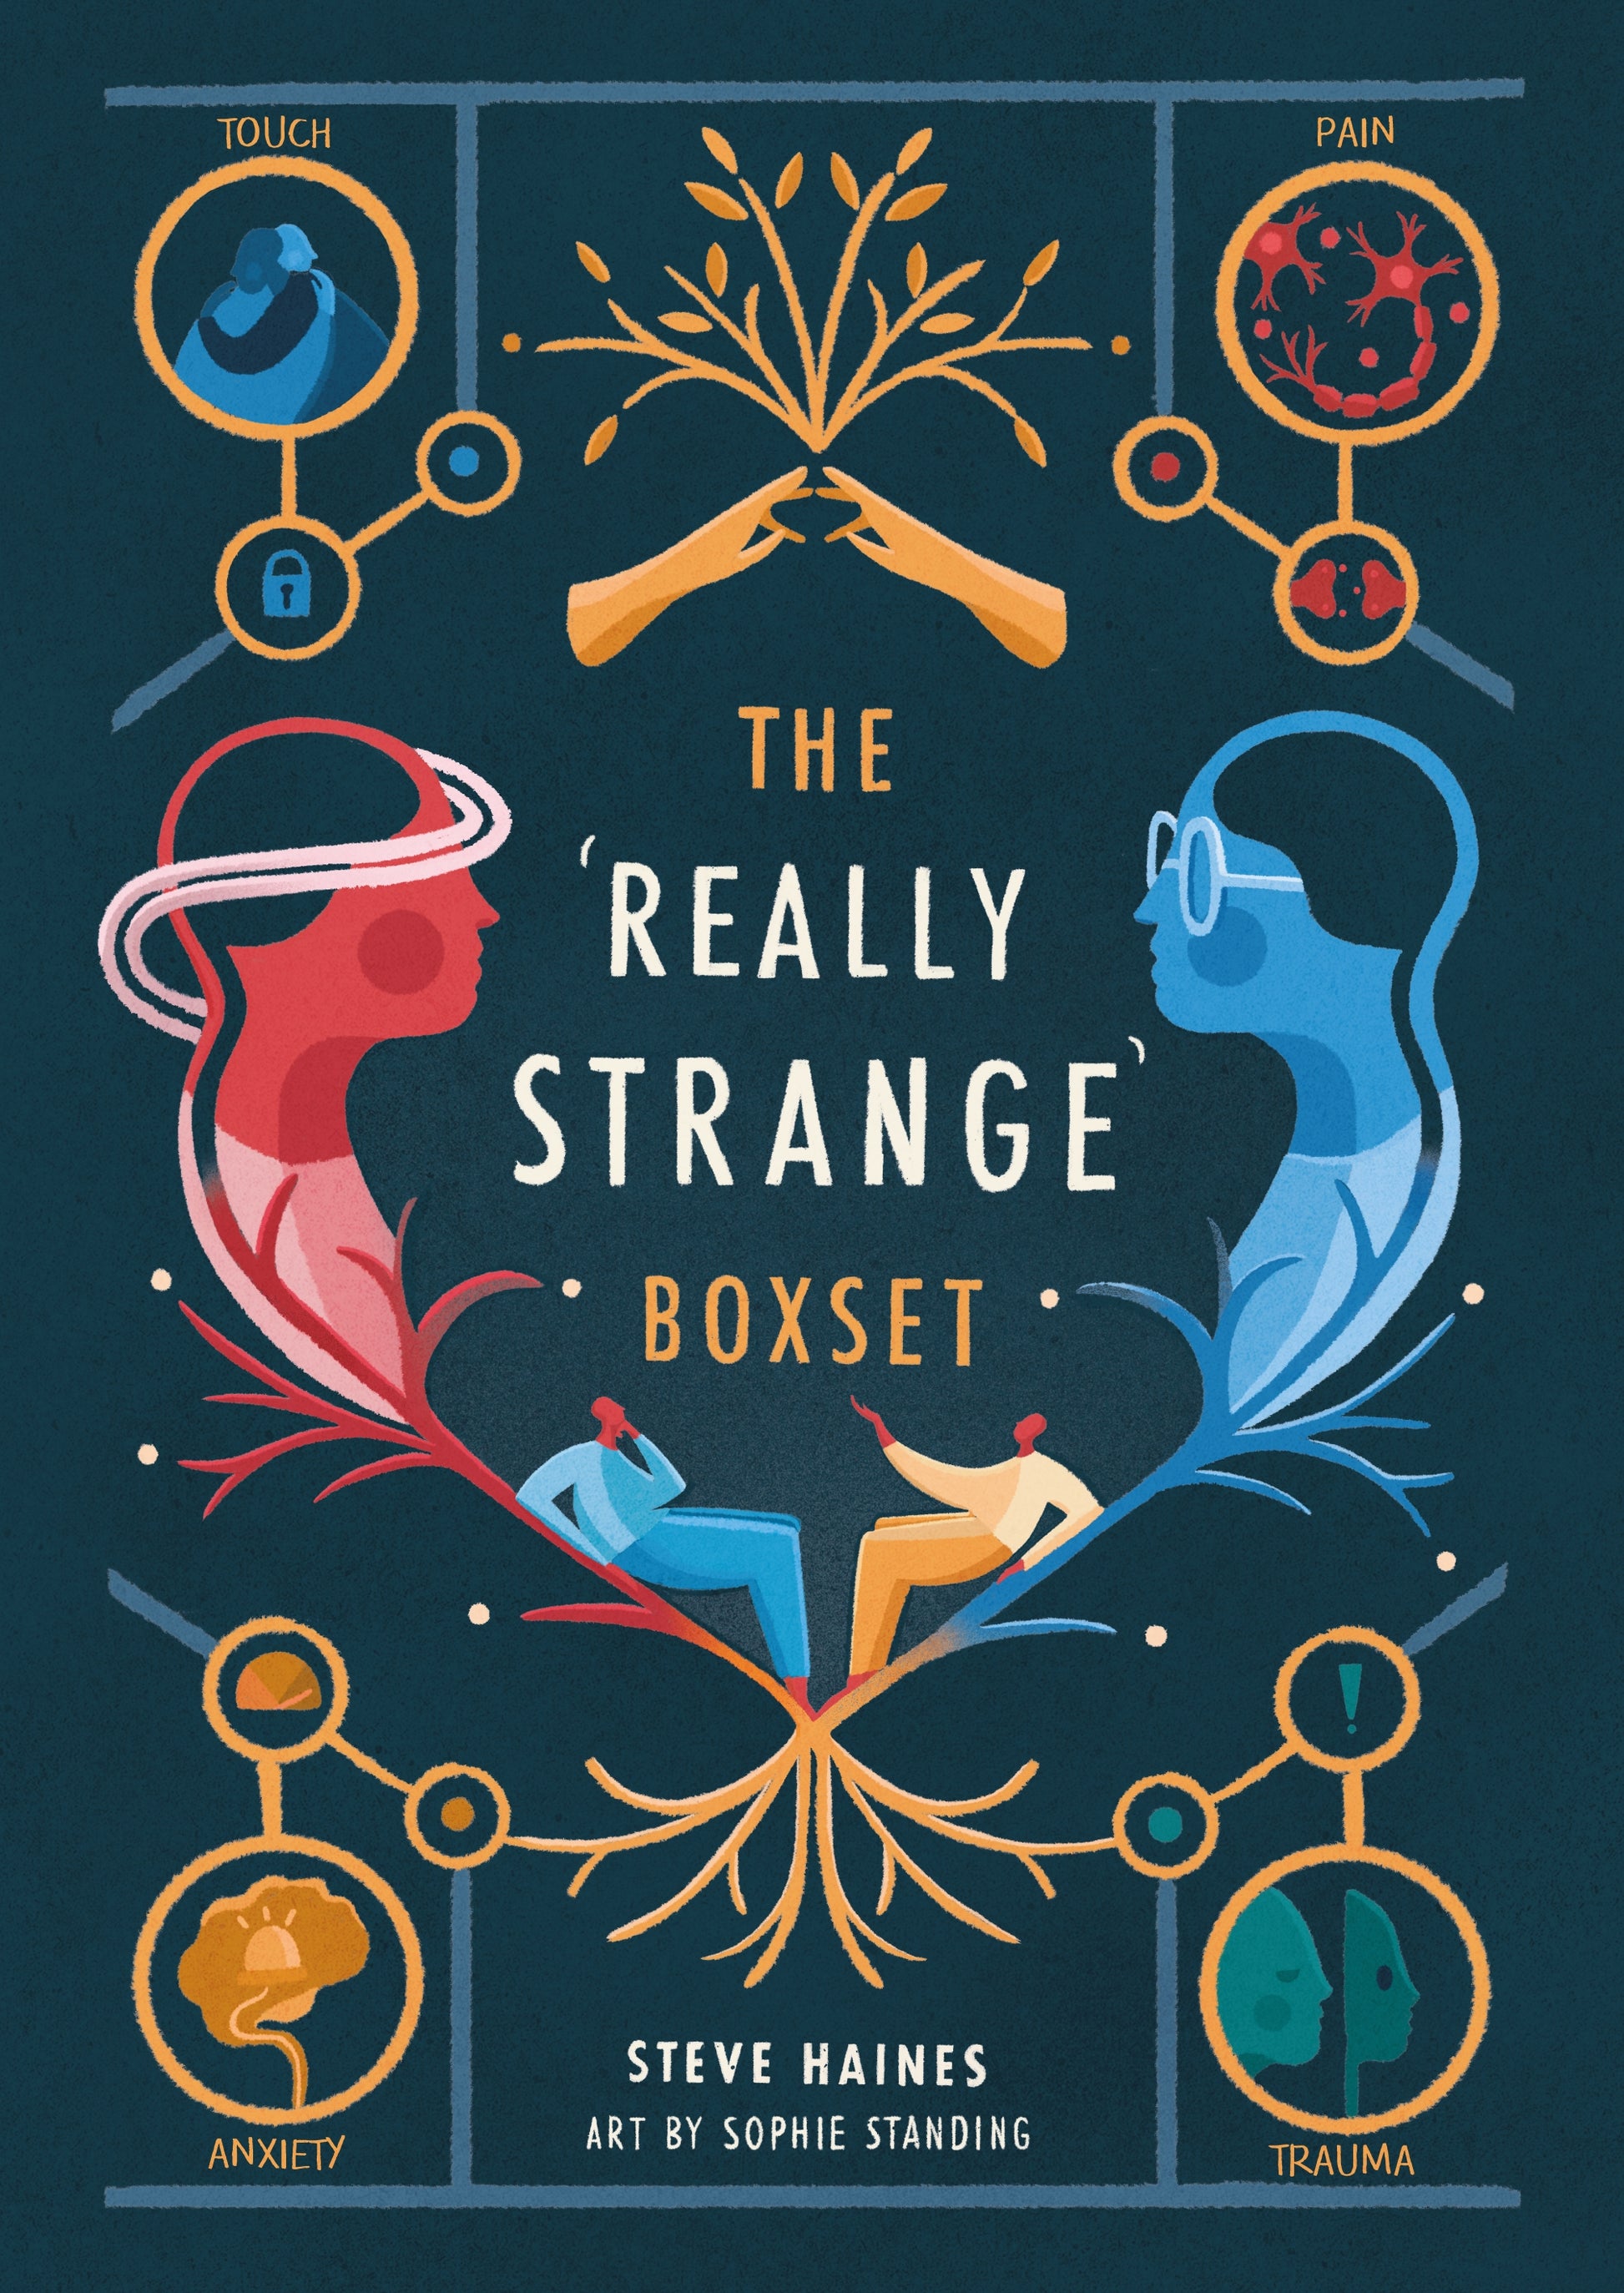 The 'Really Strange' Boxset by Steve Haines, Sophie Standing